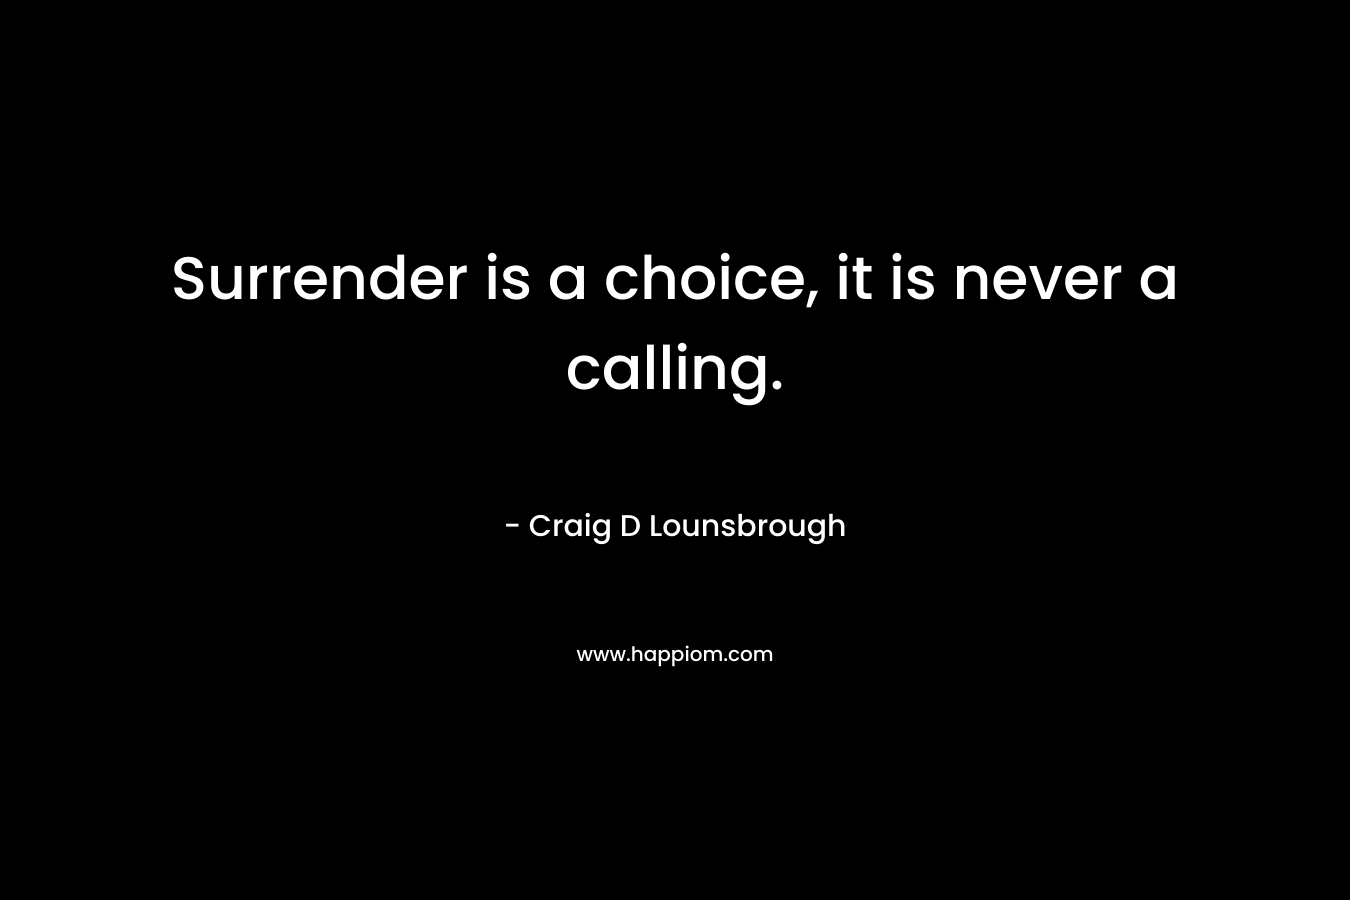 Surrender is a choice, it is never a calling.